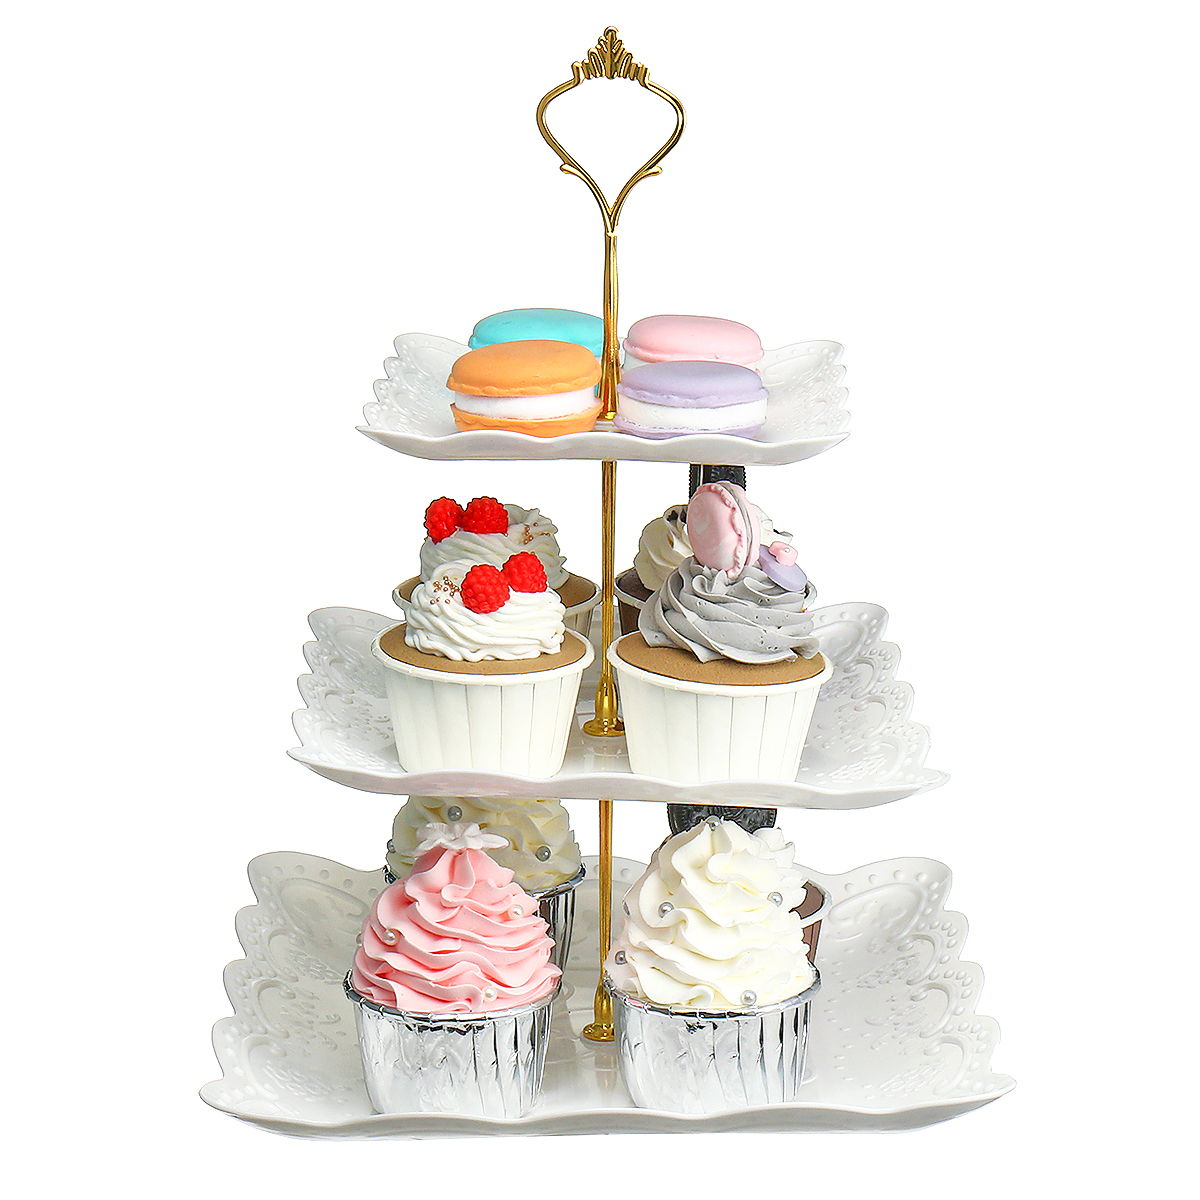 European-style-23-Tier-Fruit-Plate-Dessert-Tray-Cake-Table-Multi-layer-Cake-Stand-Cake-Setting-Table-1926348-7